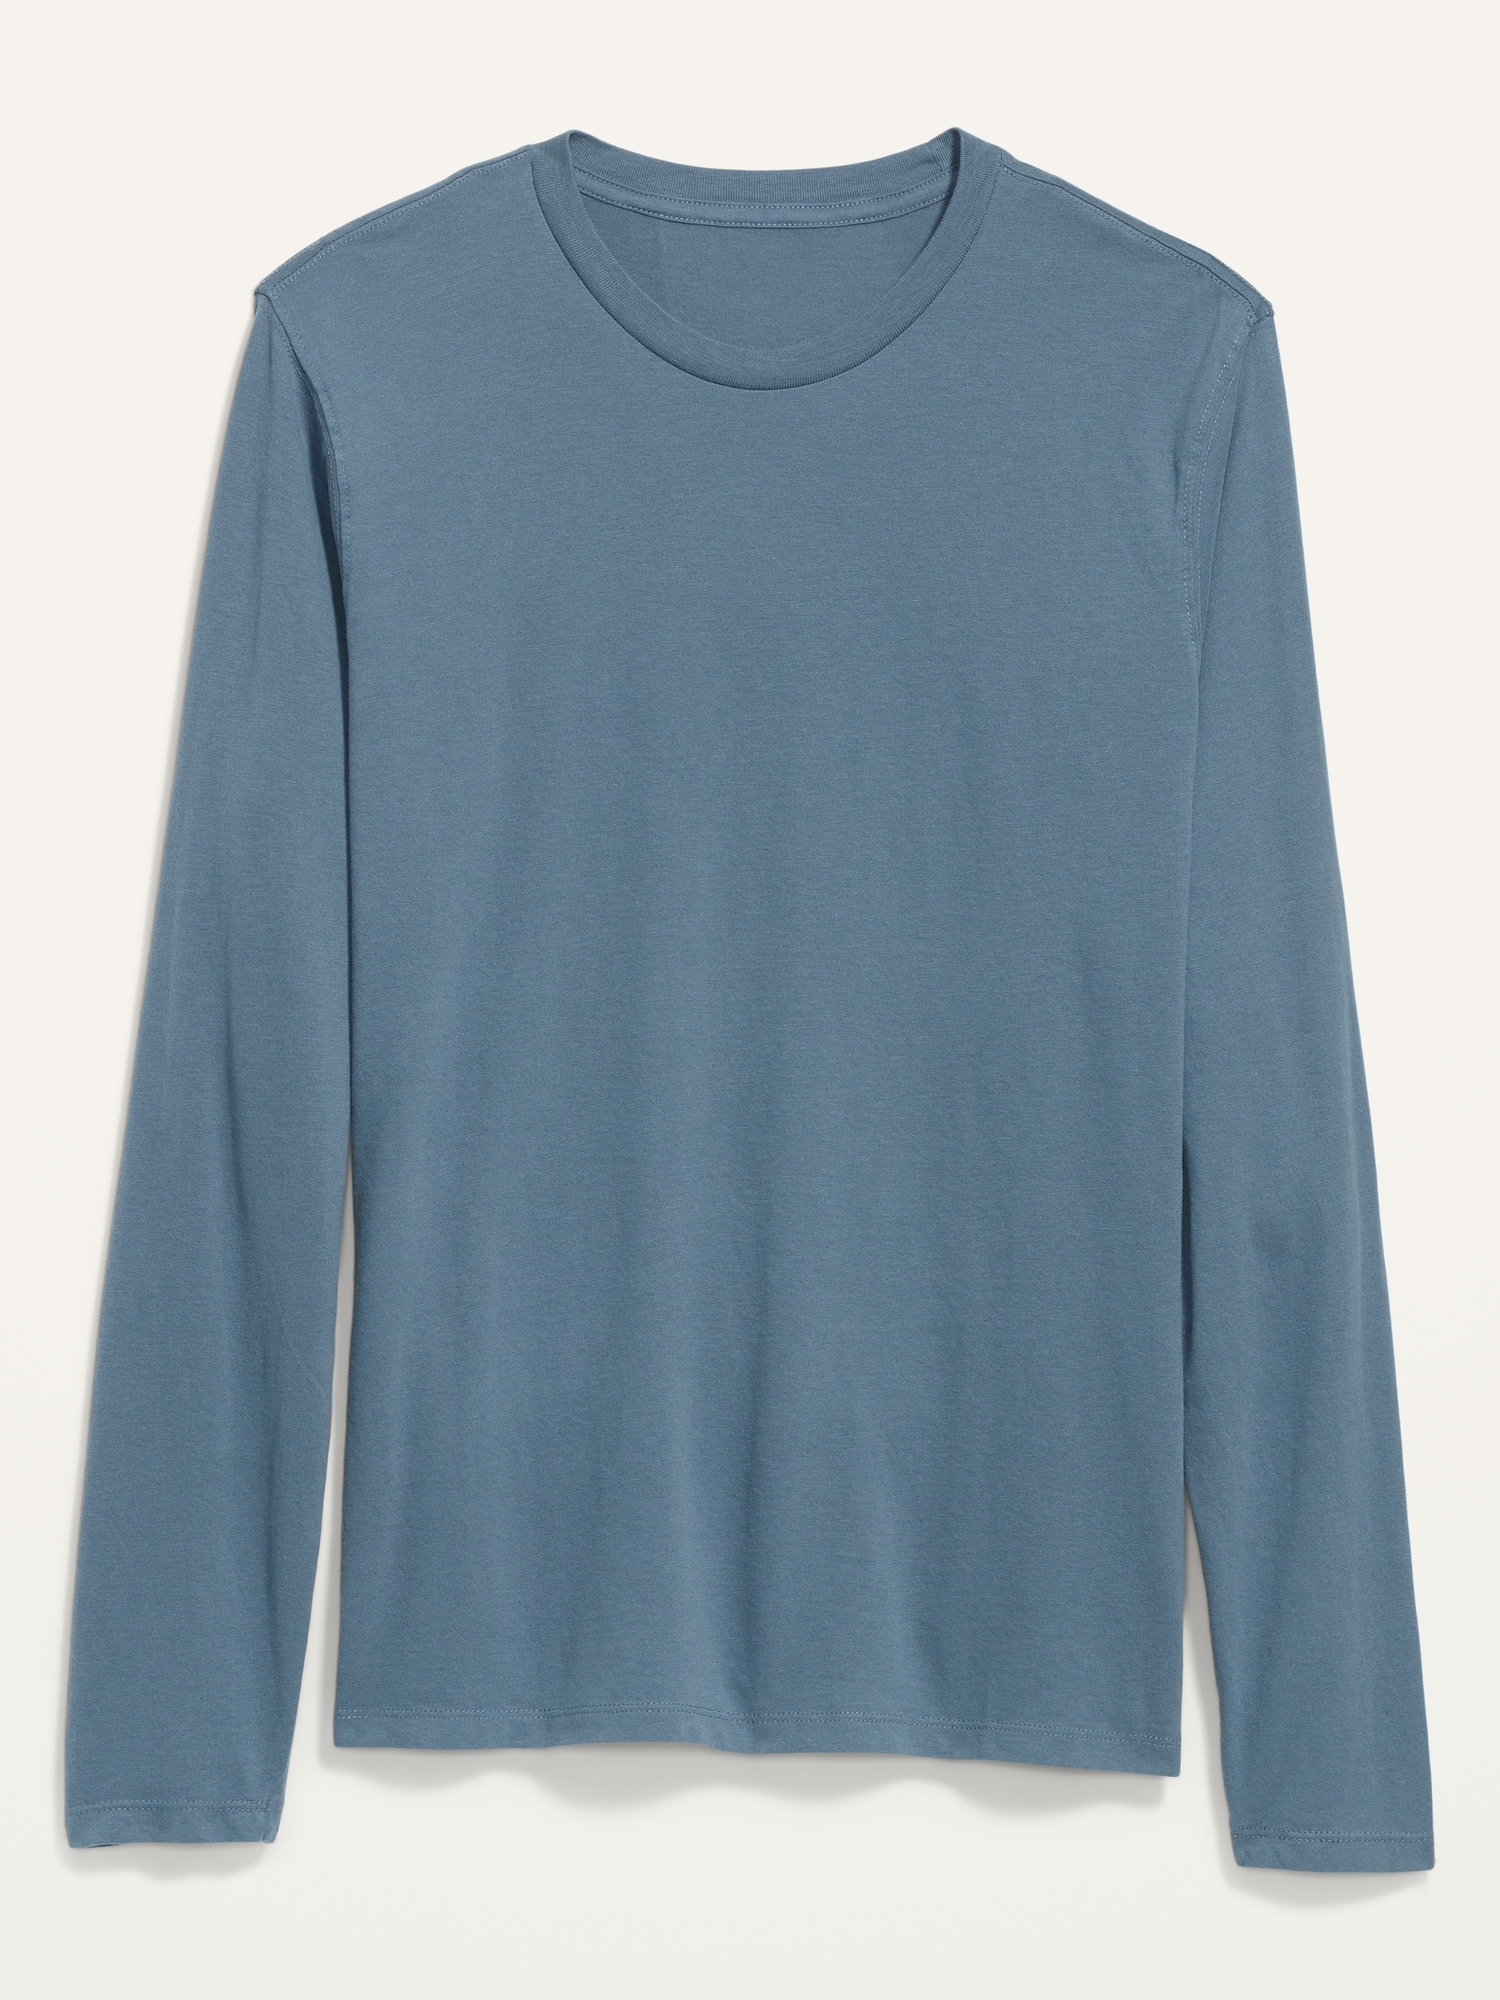 Soft-Washed Crew-Neck Long-Sleeve T-Shirt for Men | Old Navy